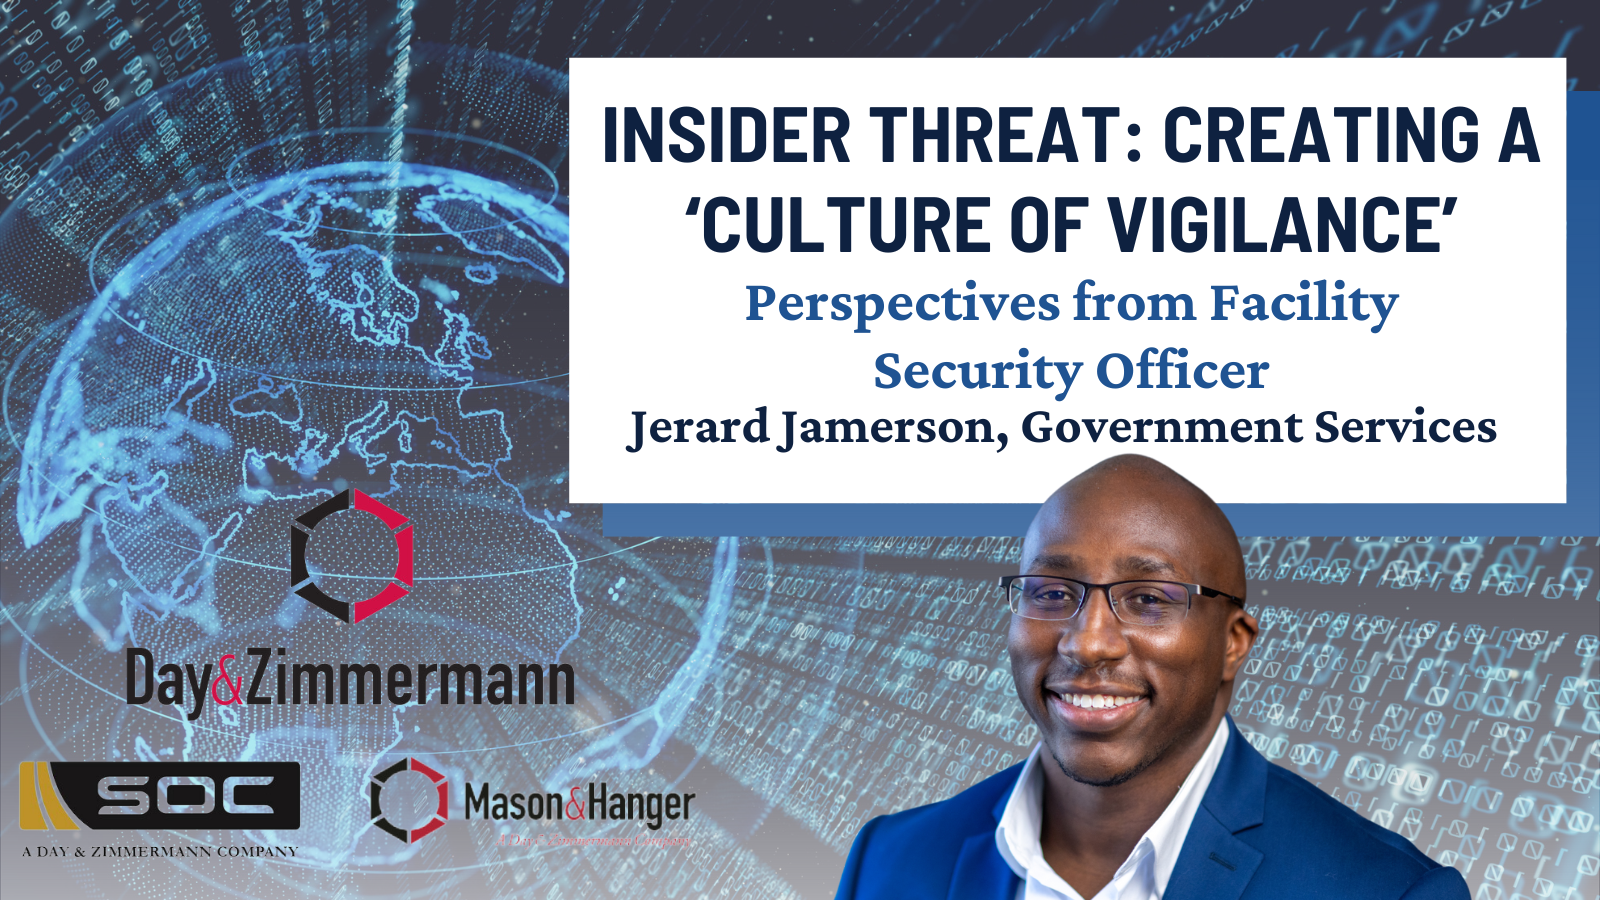 Video Series: Insider Threat - Creating a ‘Culture of Vigilance’ featured image